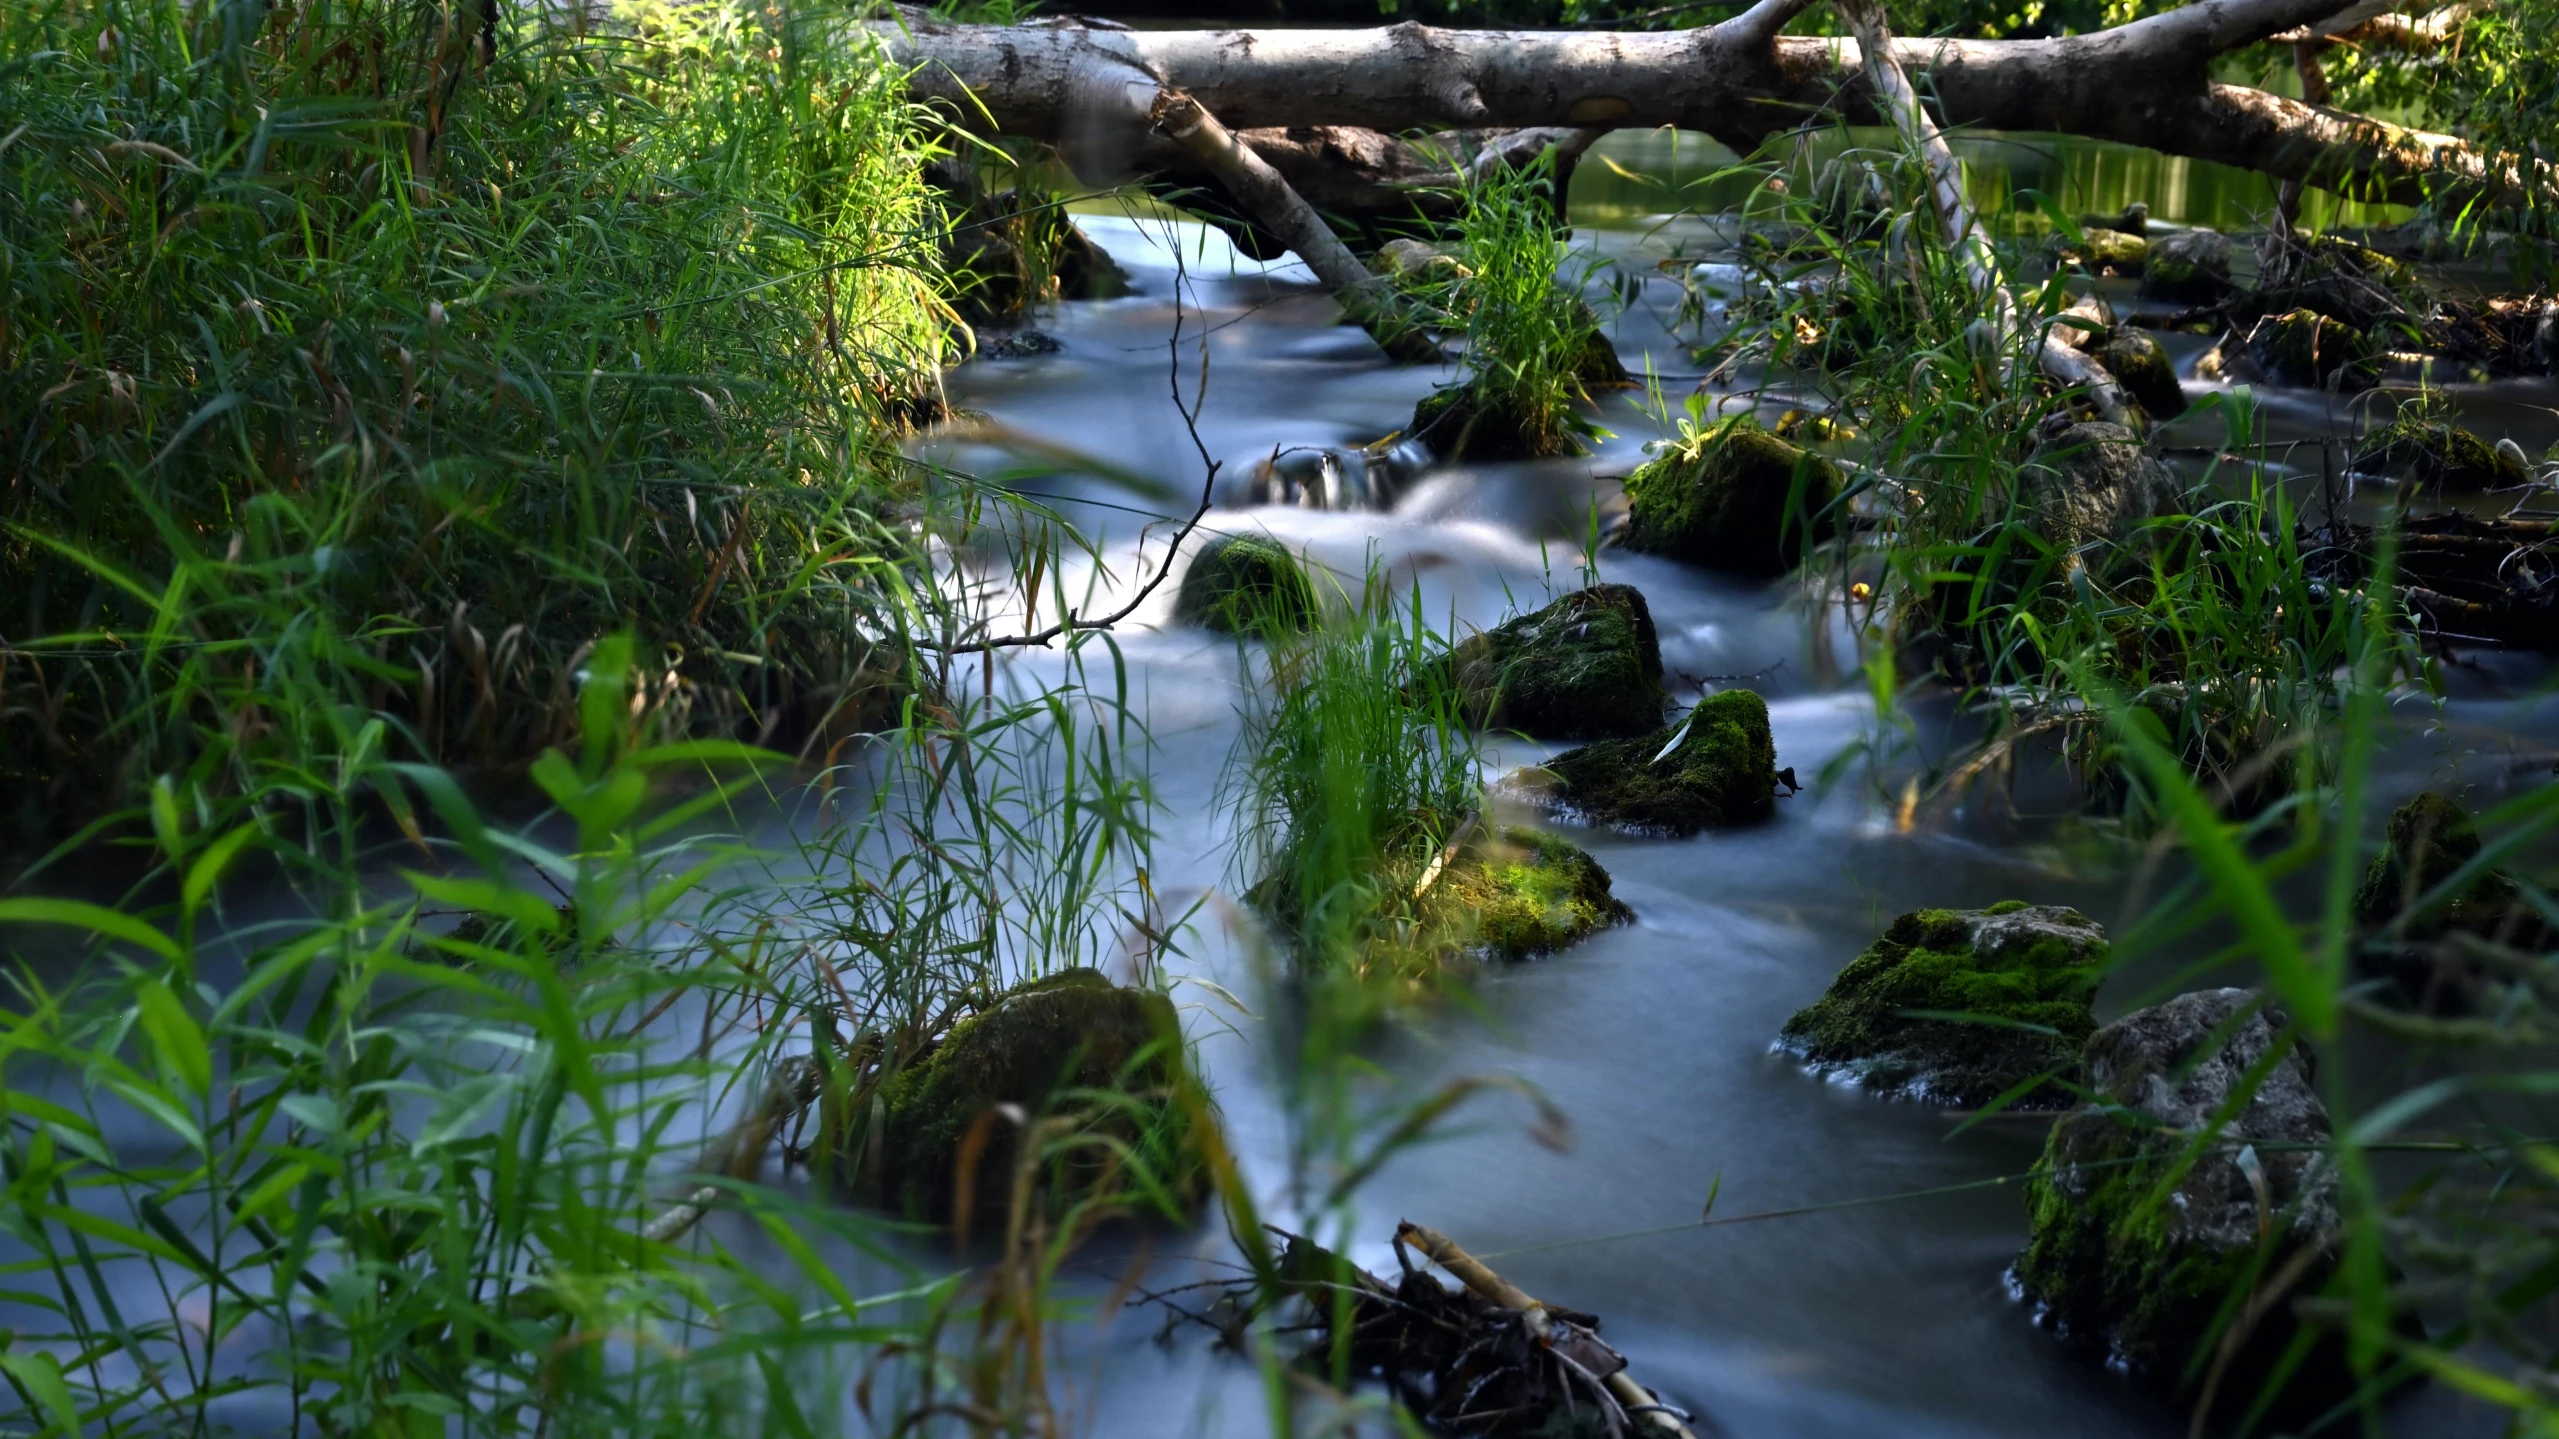 water running through a lush green field filled with grass